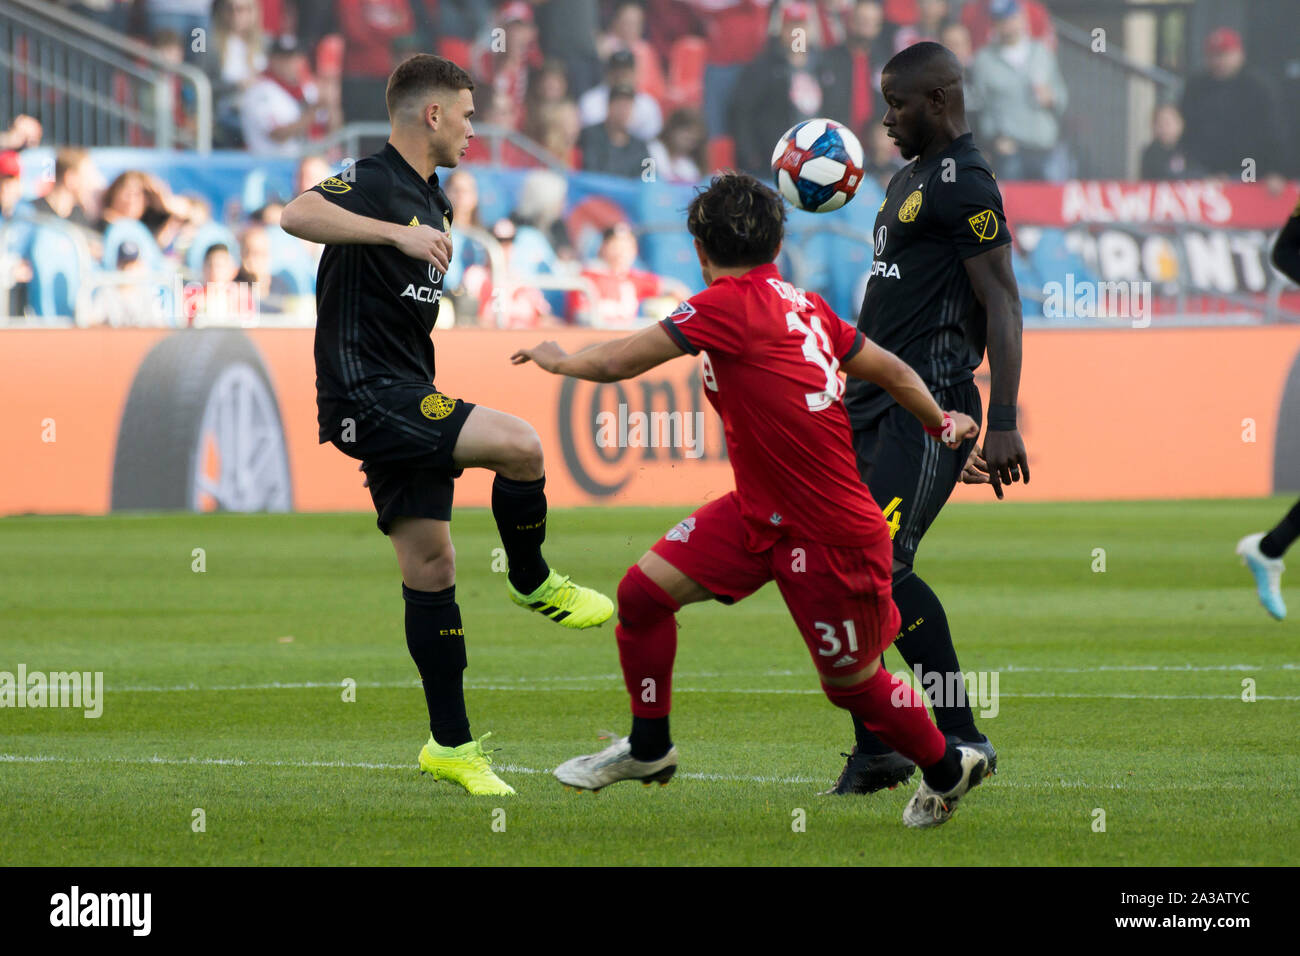 Toronto, Canada. 06th Oct, 2019. Wil Trapp (L), Jonathan Mensah (R) and Tsubasa Endoh (M) in action during the MLS (Major League Soccer) game between Toronto FC and Columbus Crew SC. Final Score: Toronto FC 1 - 0 Columbus Crew SC. Credit: SOPA Images Limited/Alamy Live News Stock Photo